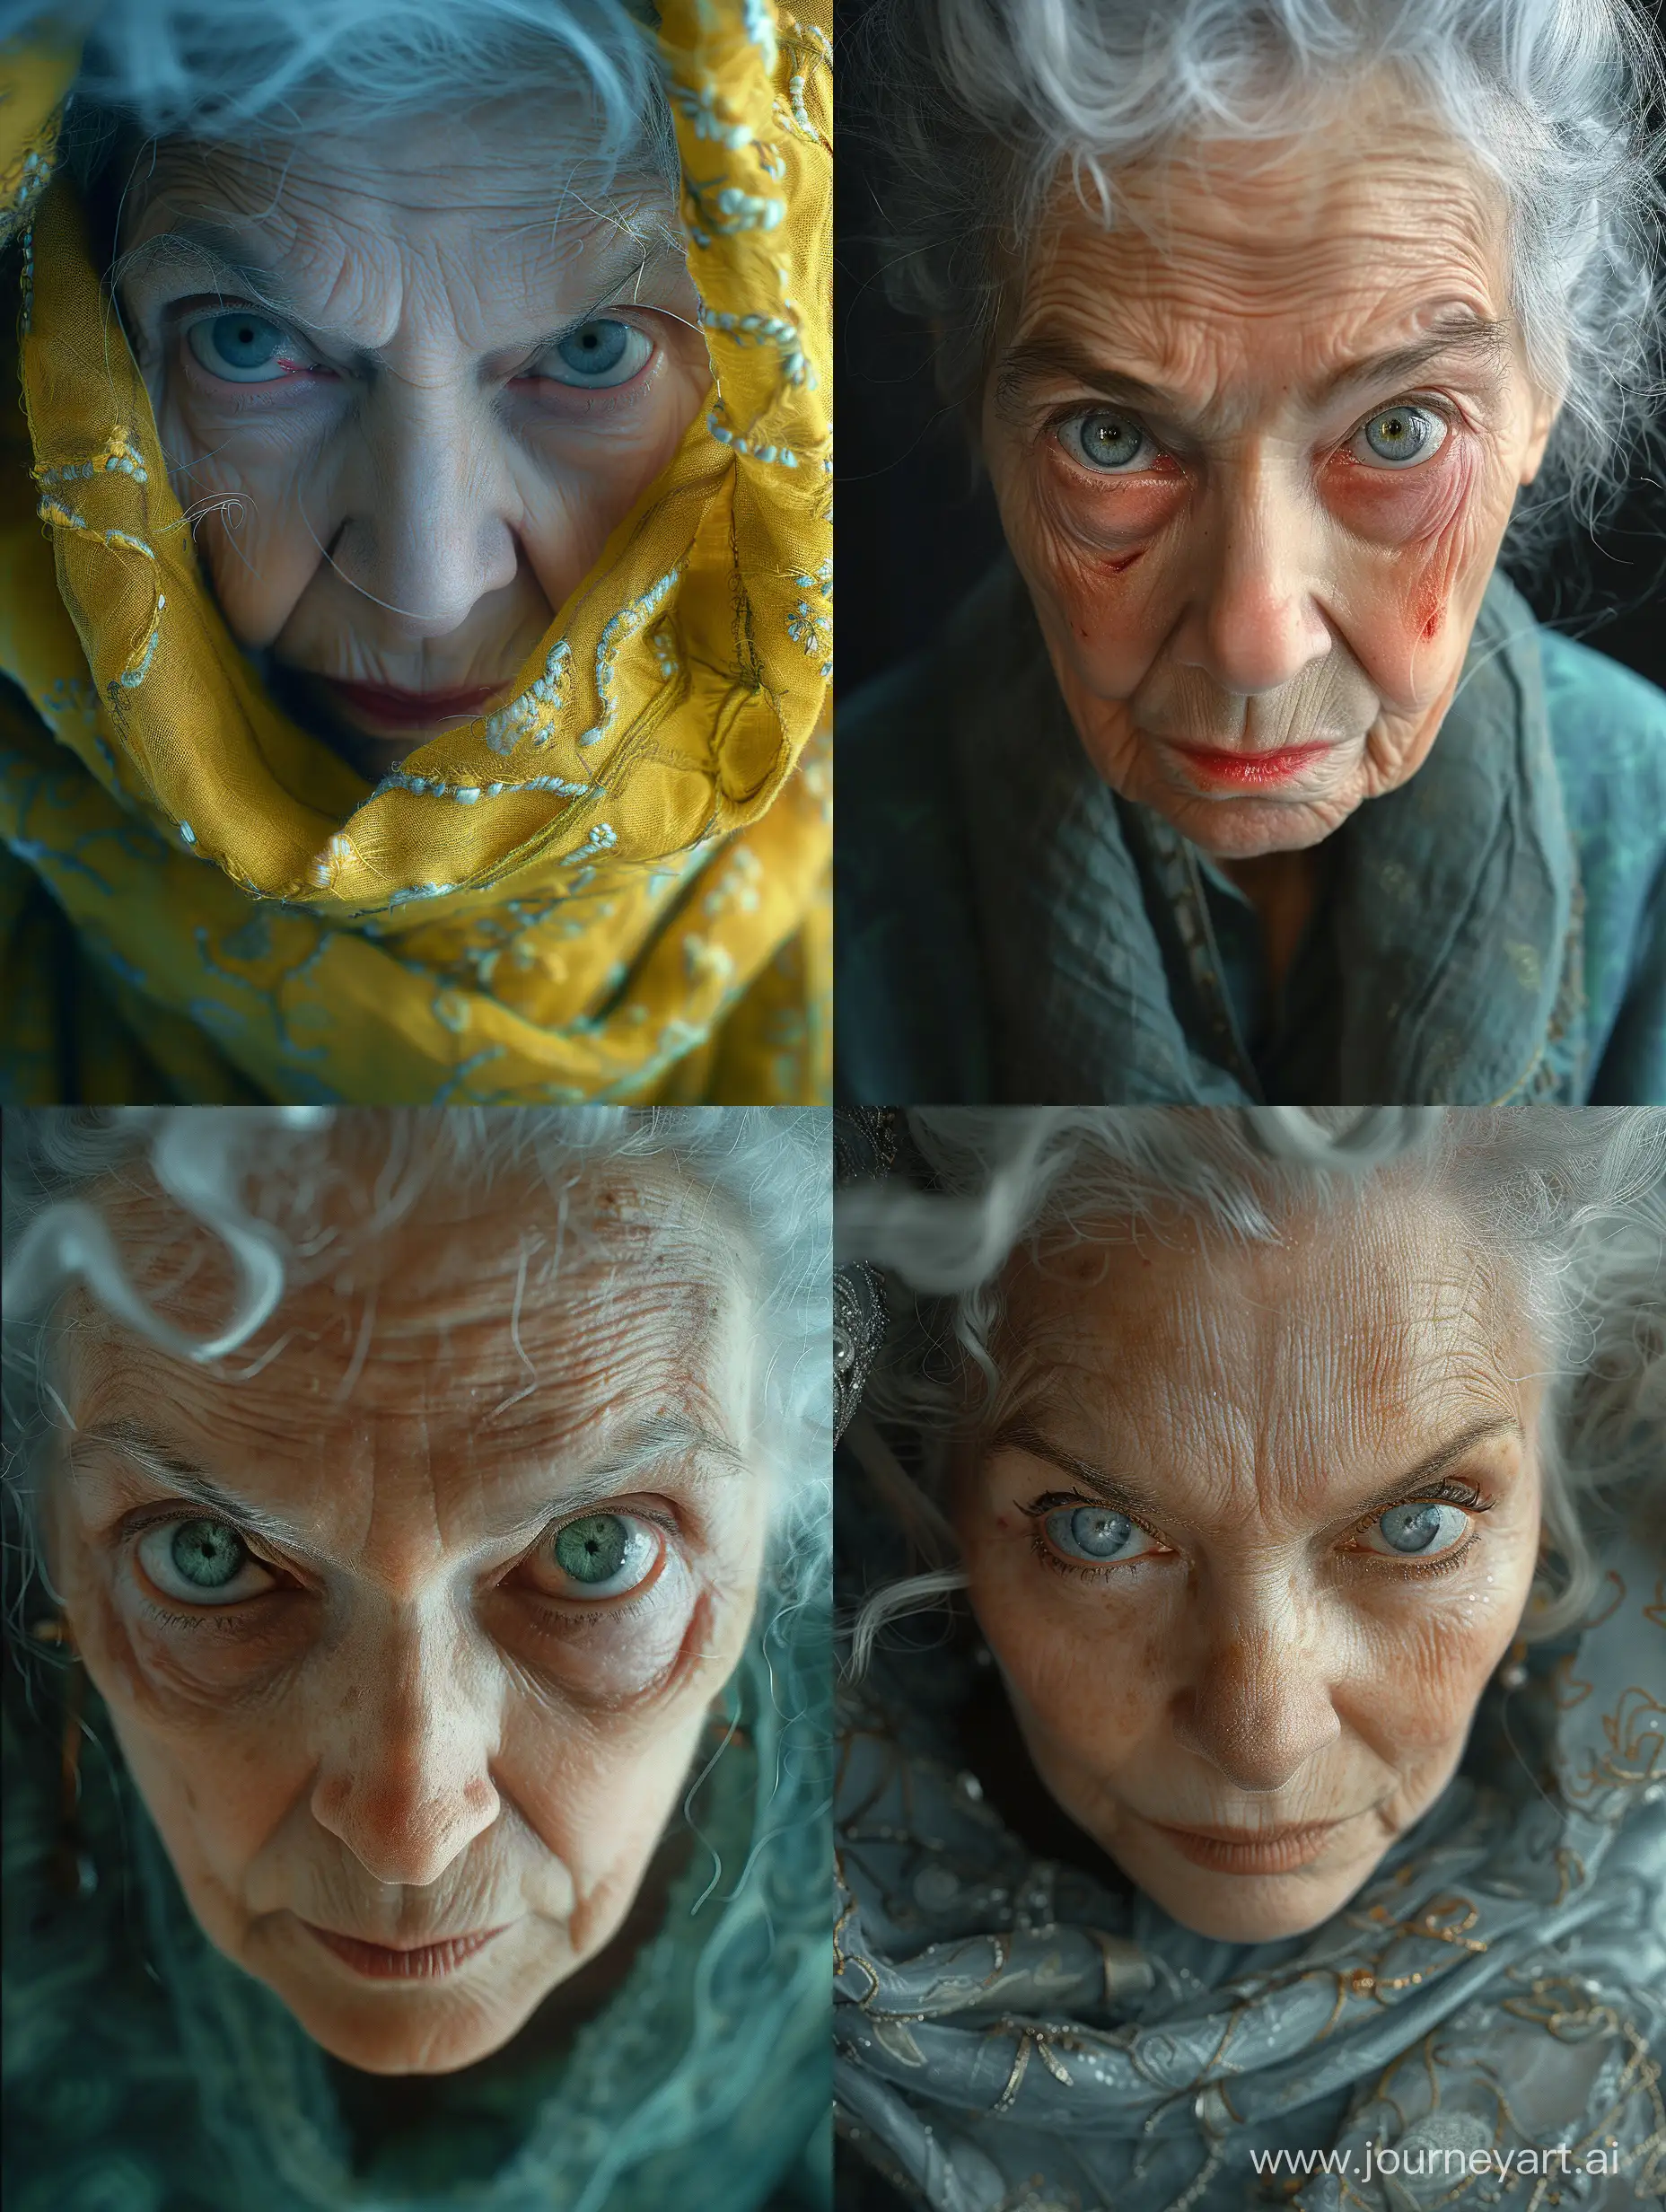 Colorful-Fashion-Shoot-Extreme-CloseUp-of-Angry-Old-Woman-with-Dramatic-Fisheye-Angle